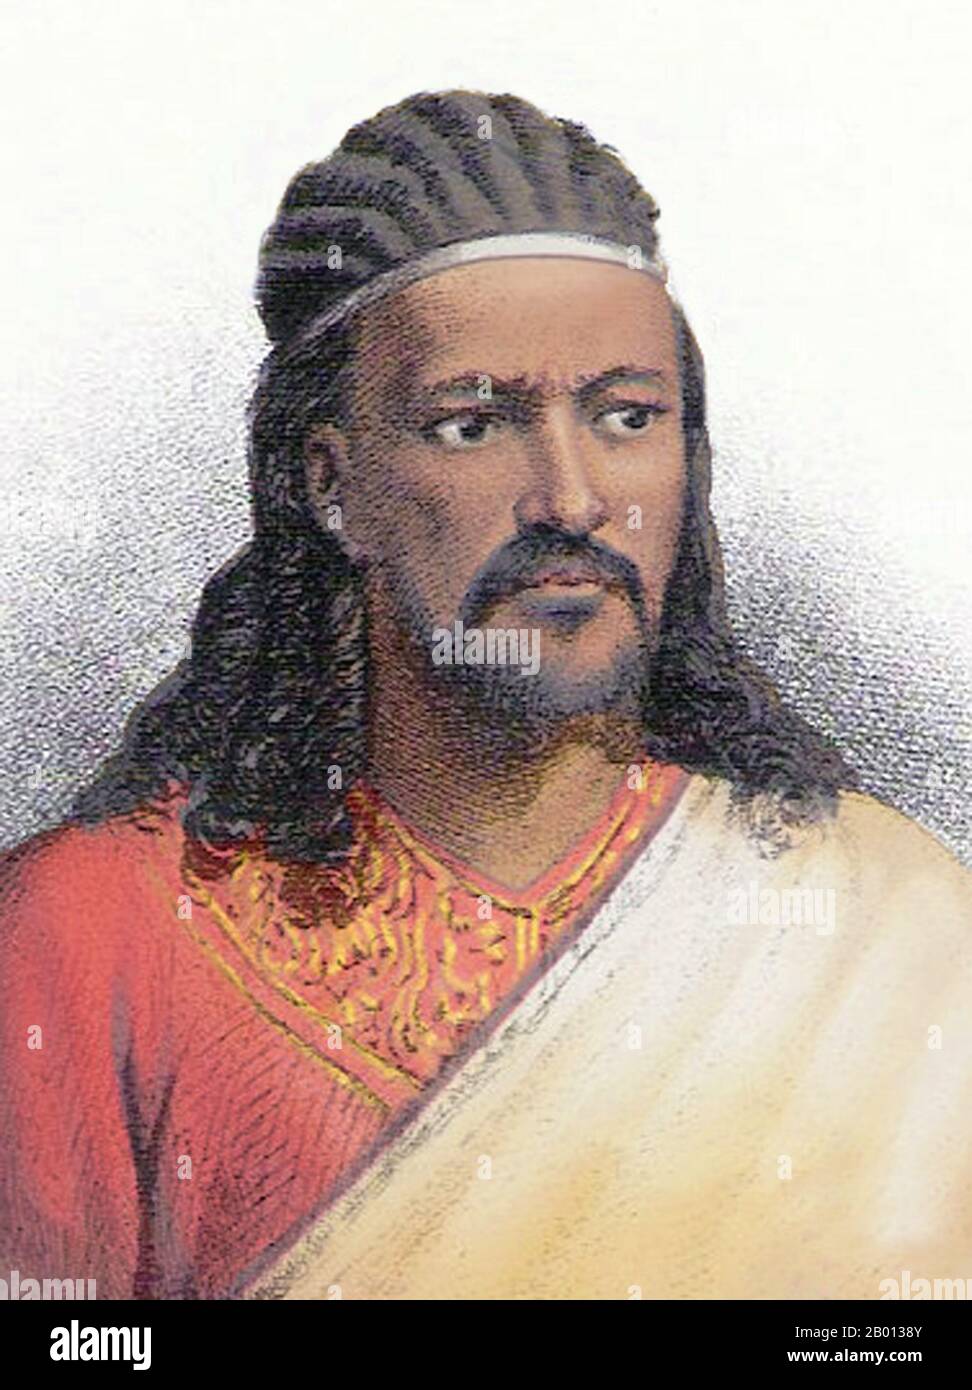 Ethiopia: Tewodros II (14 January 1818 - 14 April 1868), Emperor of Ethiopia (r. 1855-1868). Portrait, c. 1860.  Tewodros/Theodore II (1818–1868), baptized as Sahle Dingil, was the Emperor (Atse) of Ethiopia from 1855 until his death. He was born Kassa Haile Giorgis, but was more regularly referred to as Kassa Hailu. His rule is often placed as the beginning of modern Ethiopia, ending the decentralised Zemene Mesafint (Era of the Princes). Stock Photo